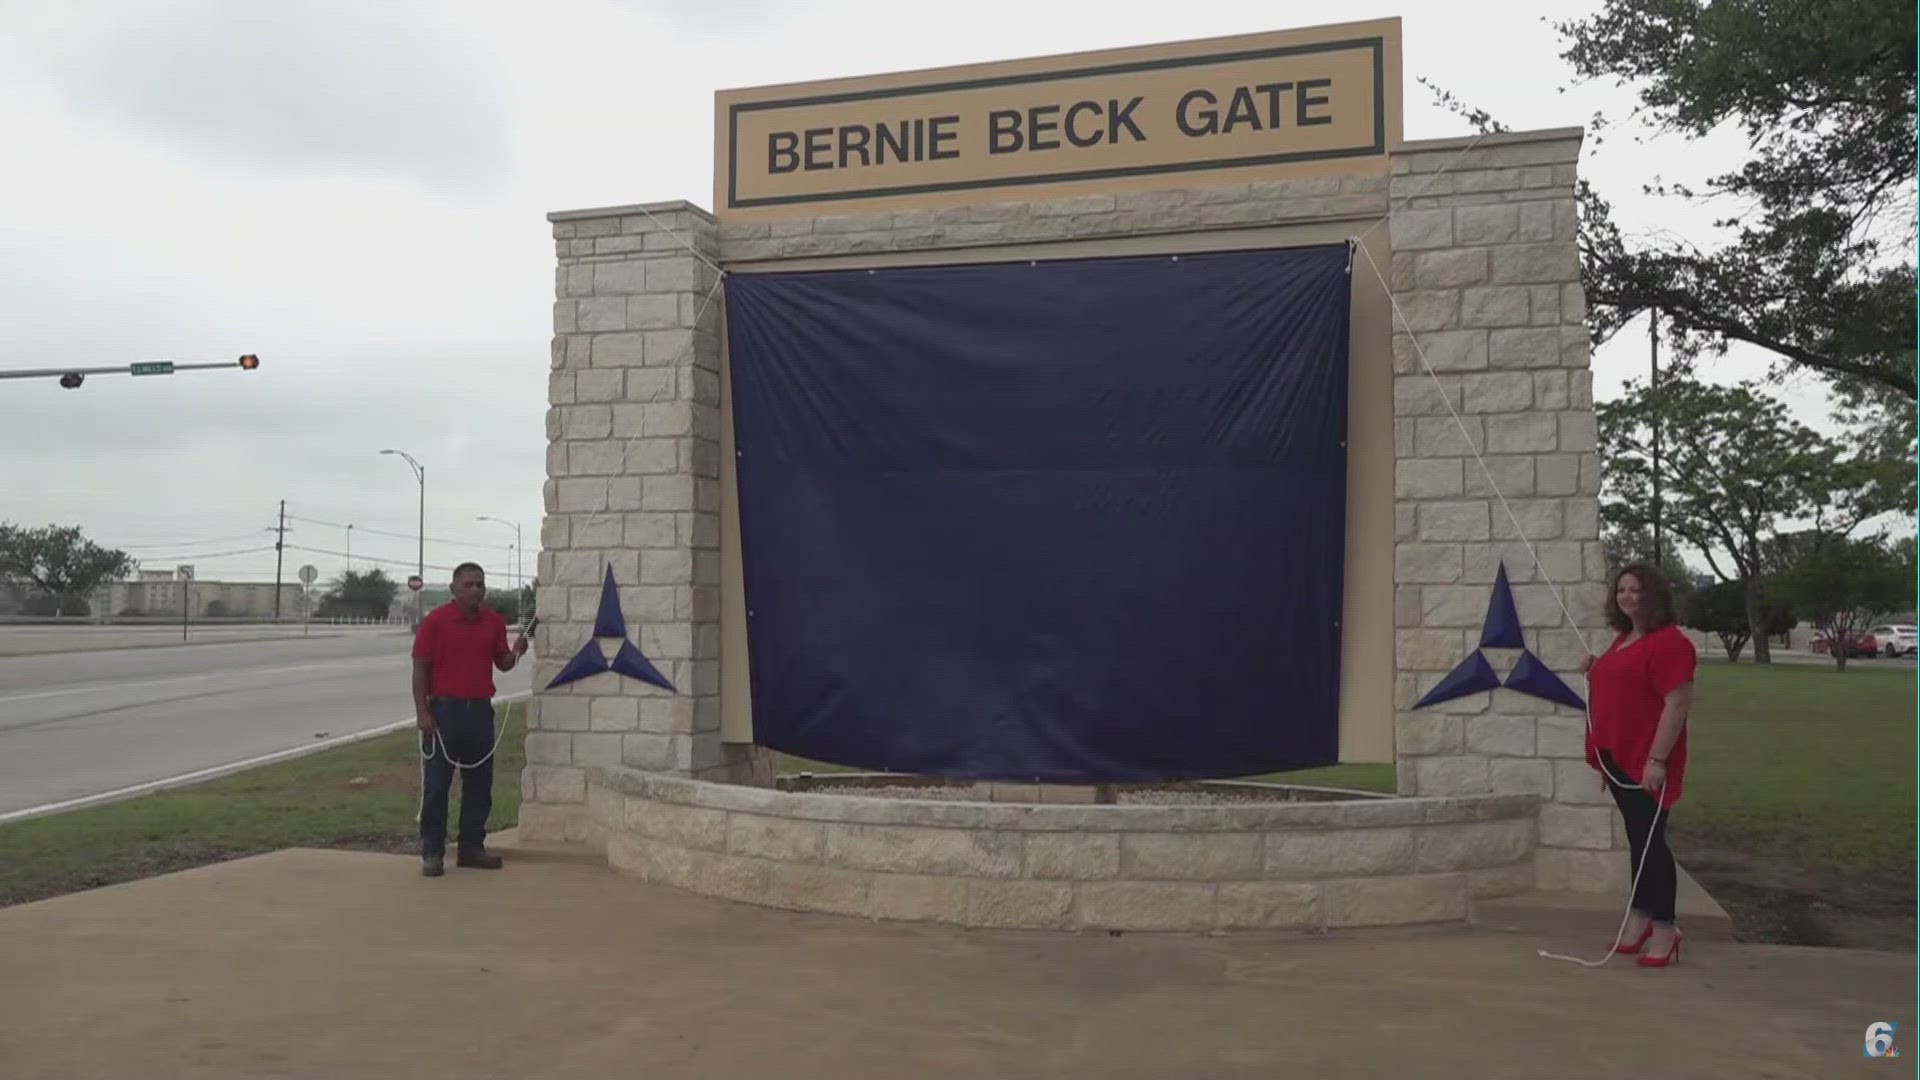 A tarp was dropped from the Bernie Beck gate to reveal the name change from Fort Hood to Fort Cavazos.